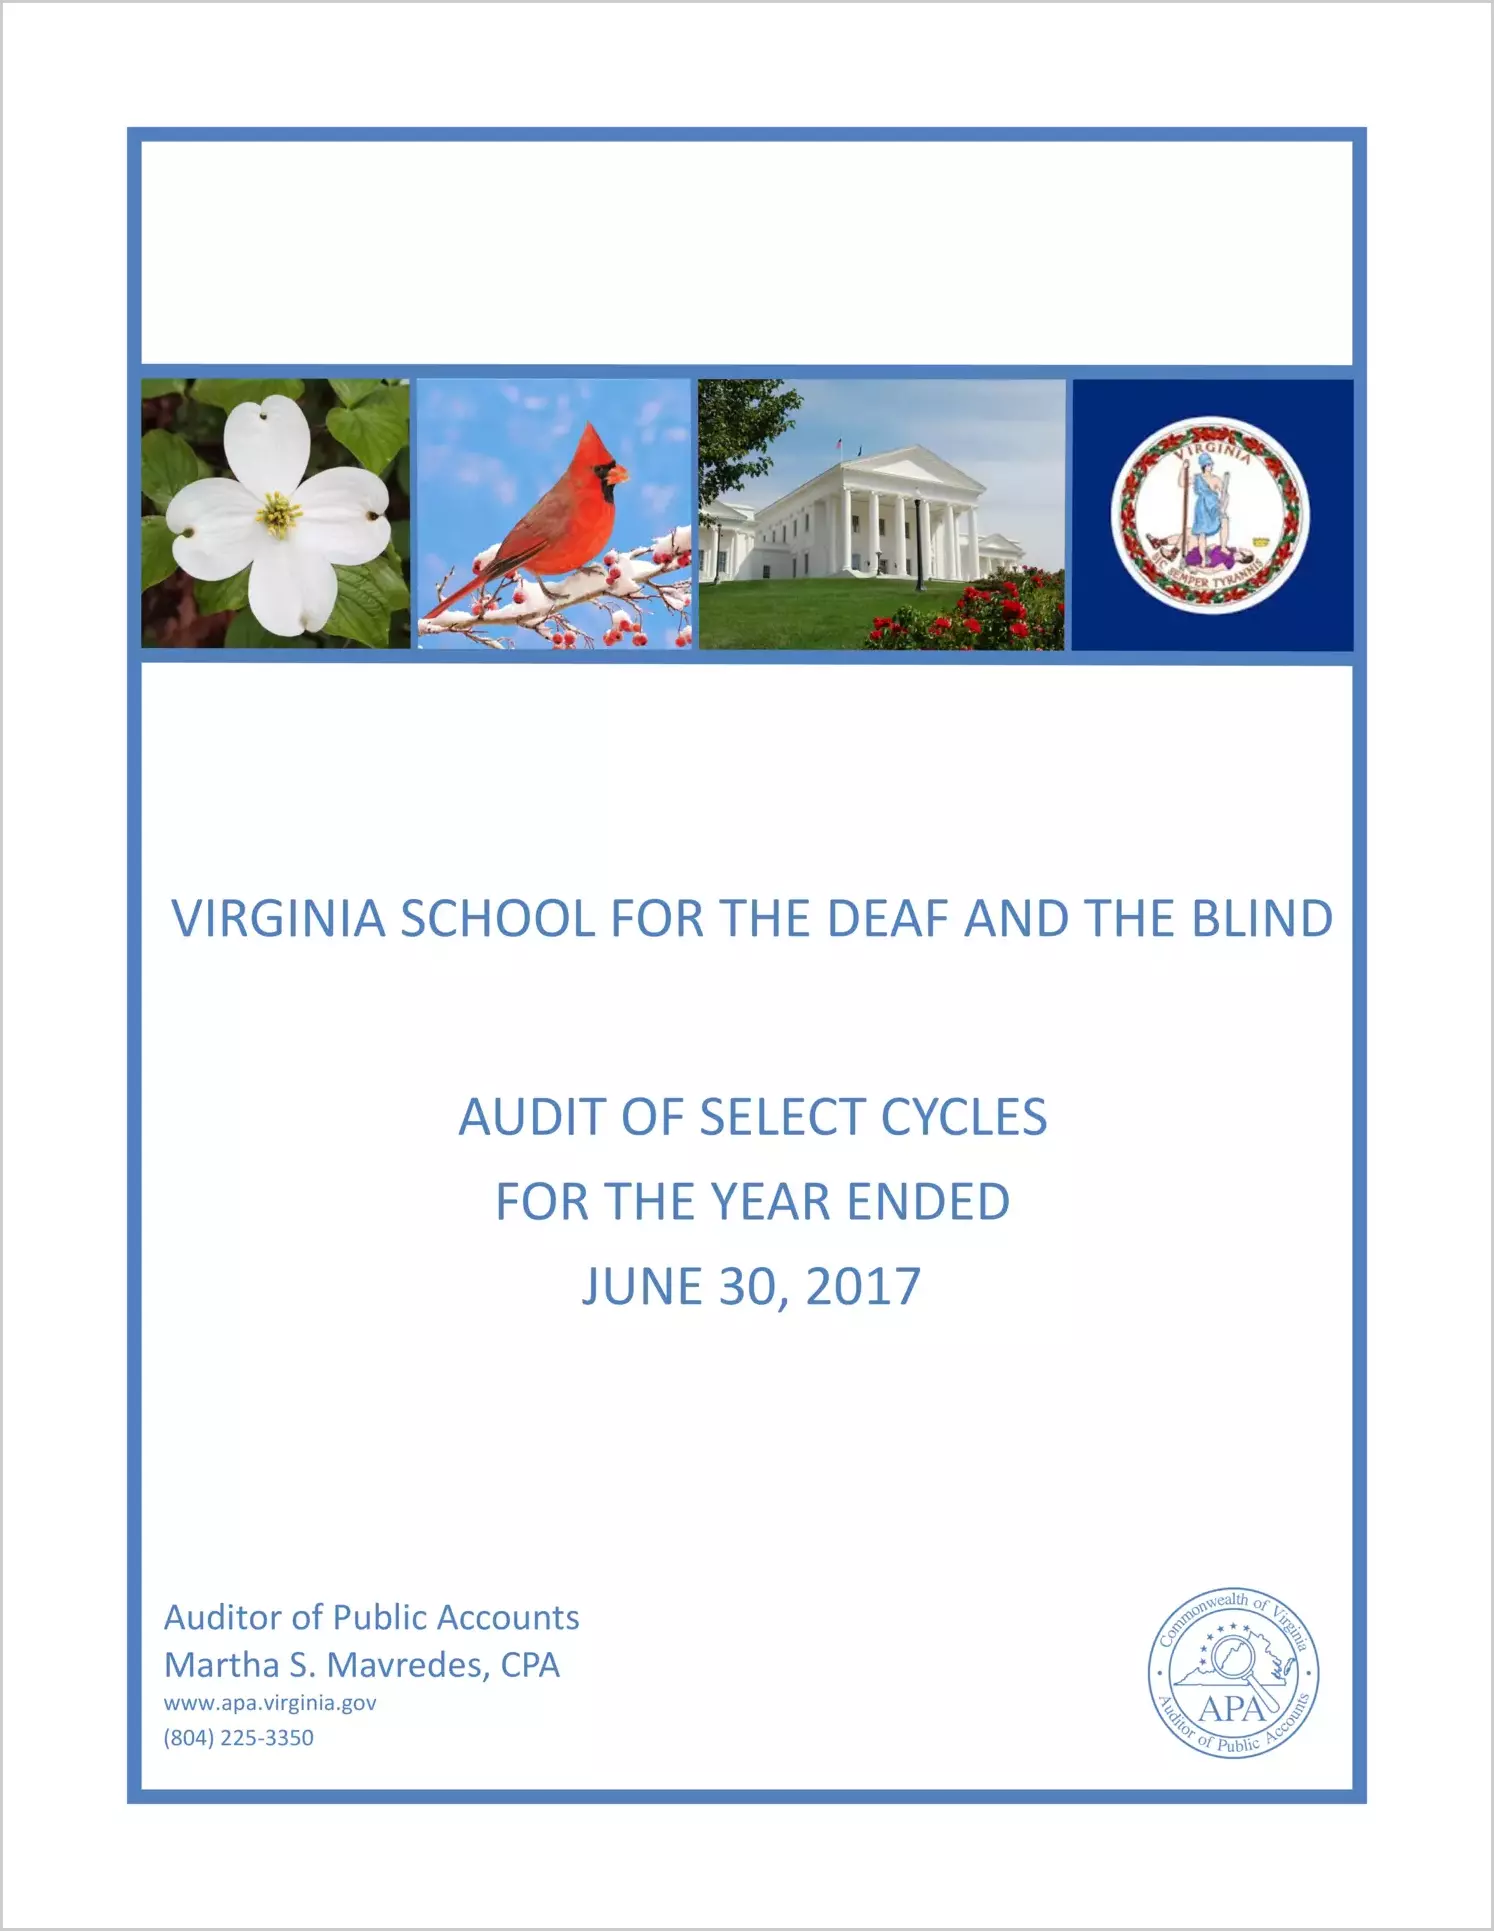 Virginia School for the Deaf and the Blind Audit of Select Cycles for the year ended June 30, 2017